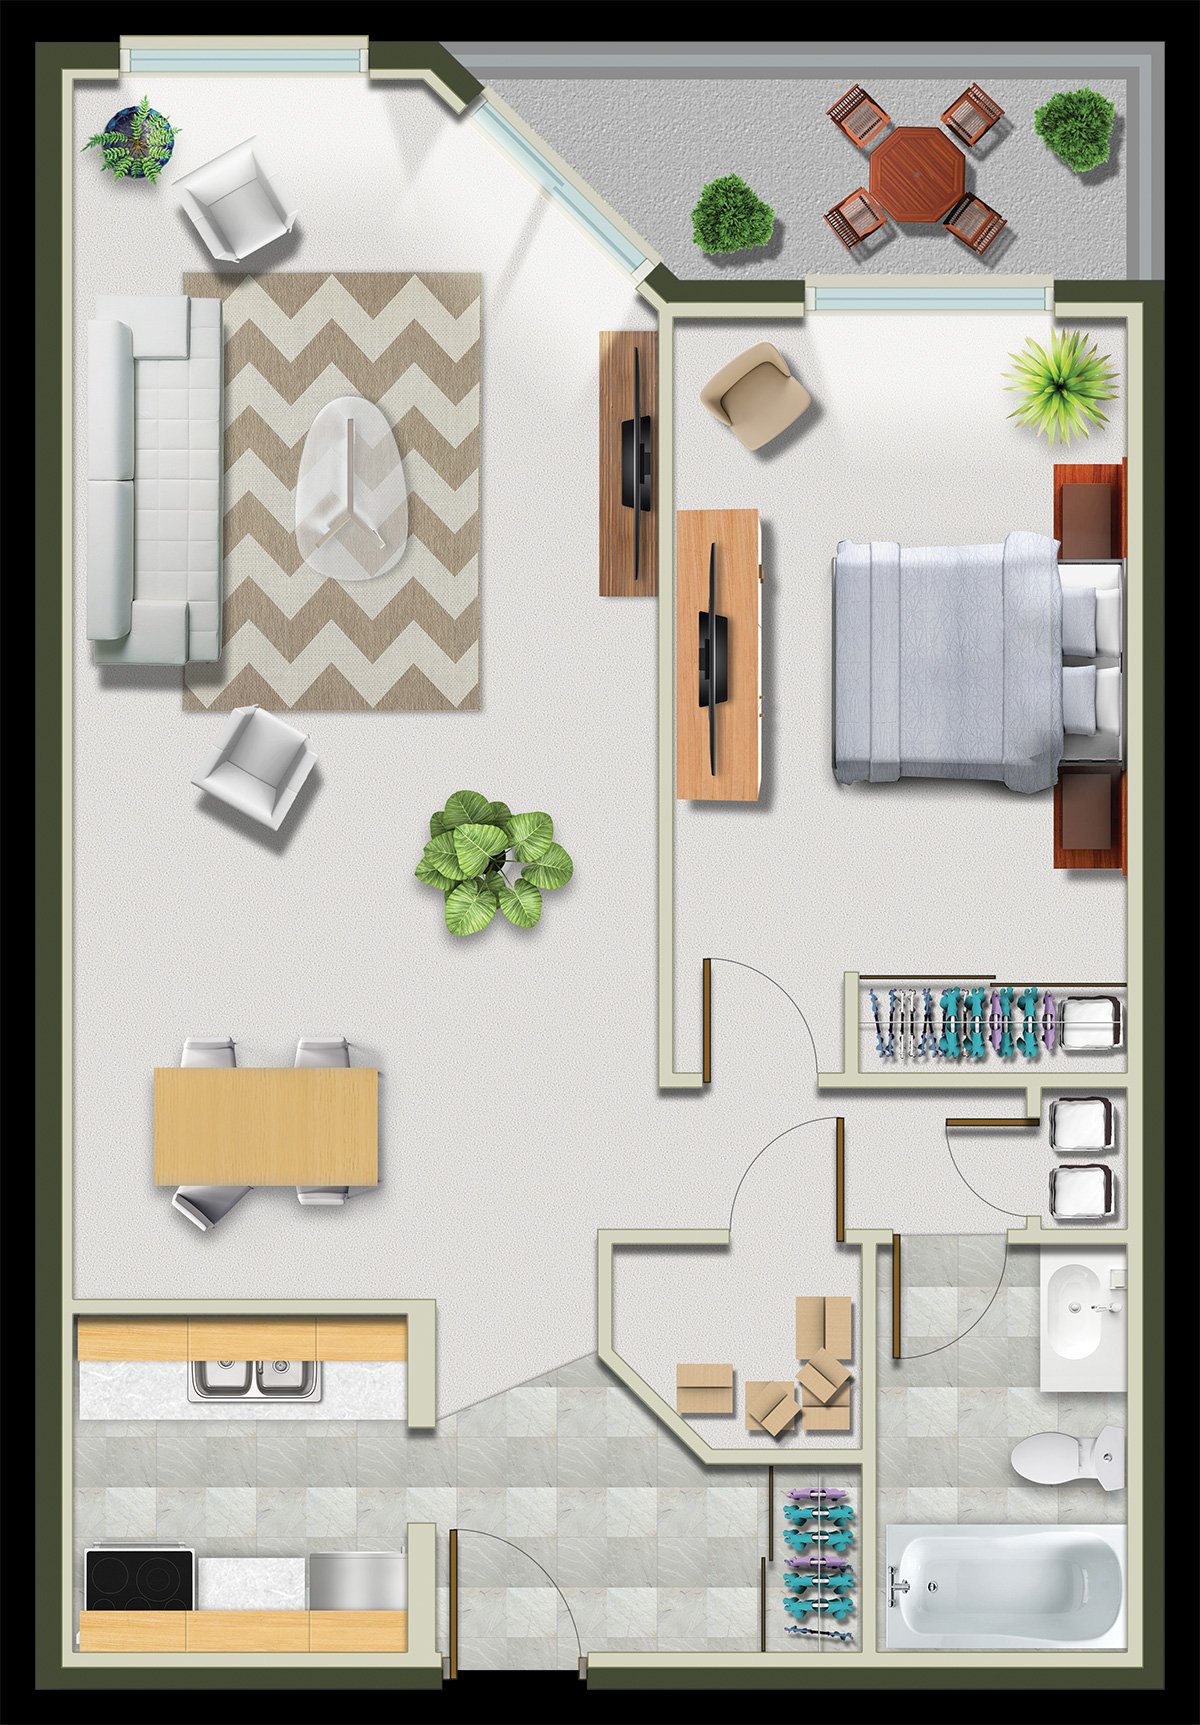 Layout of 1 bedroom apartment